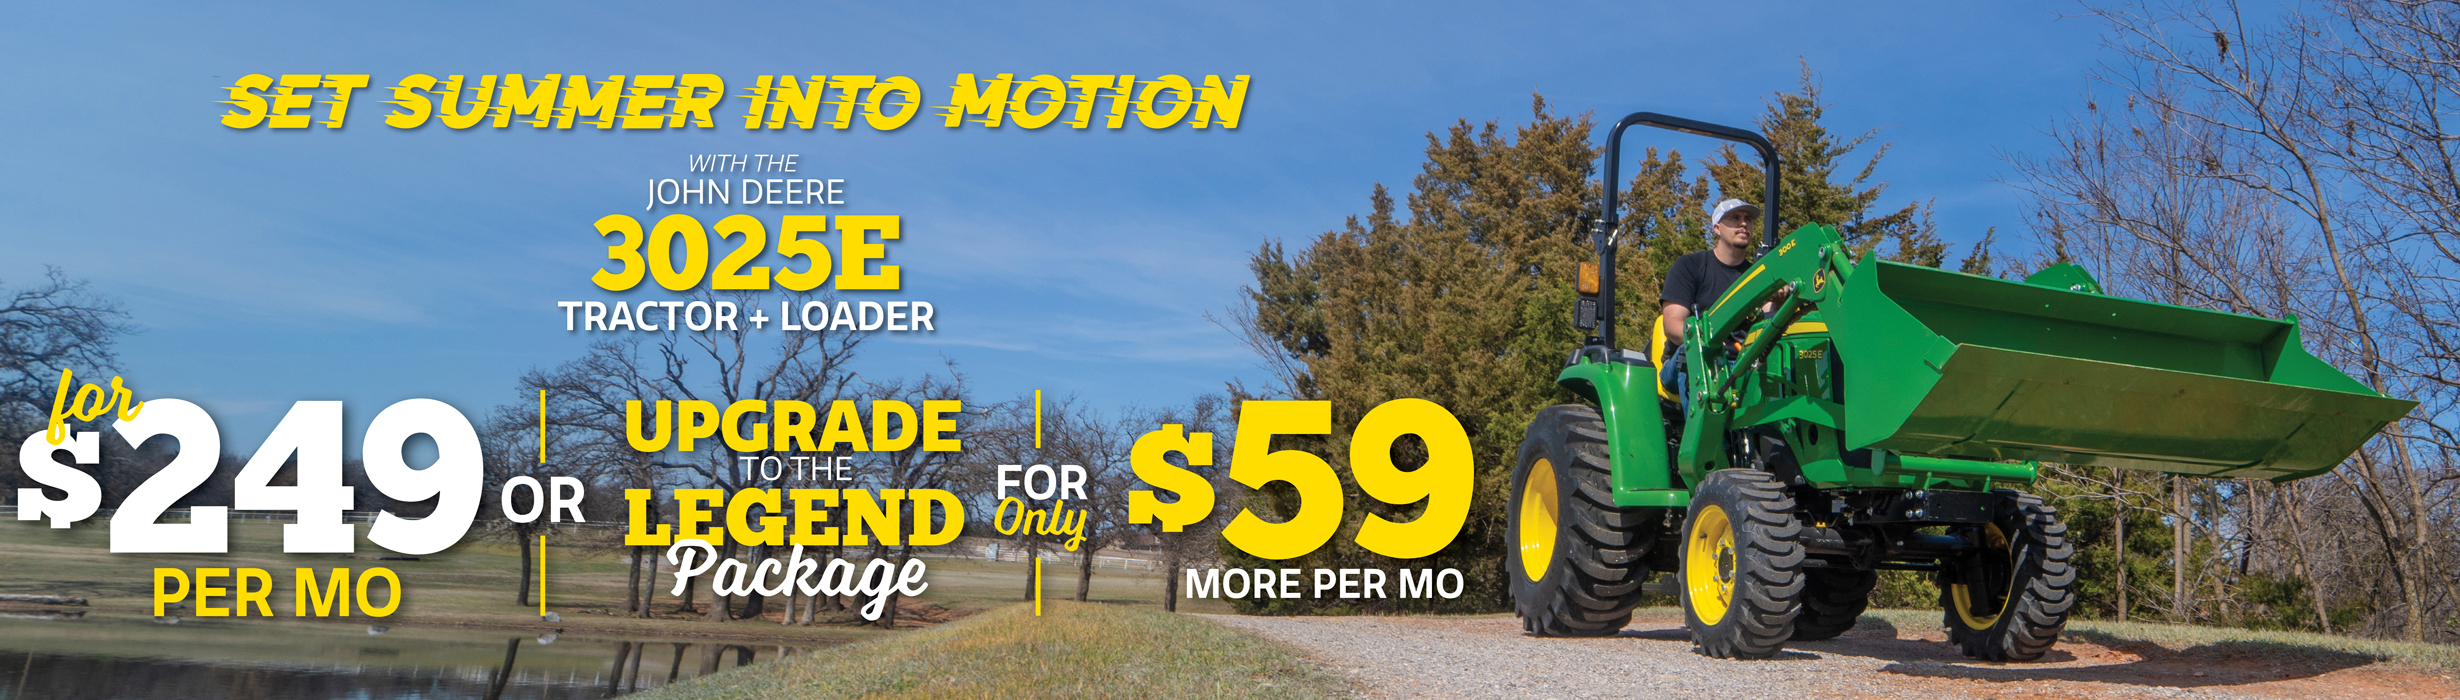 Get the 3025E Tractor + Loader for $249/mo or upgrade to the Legend for only $59 more per mo!